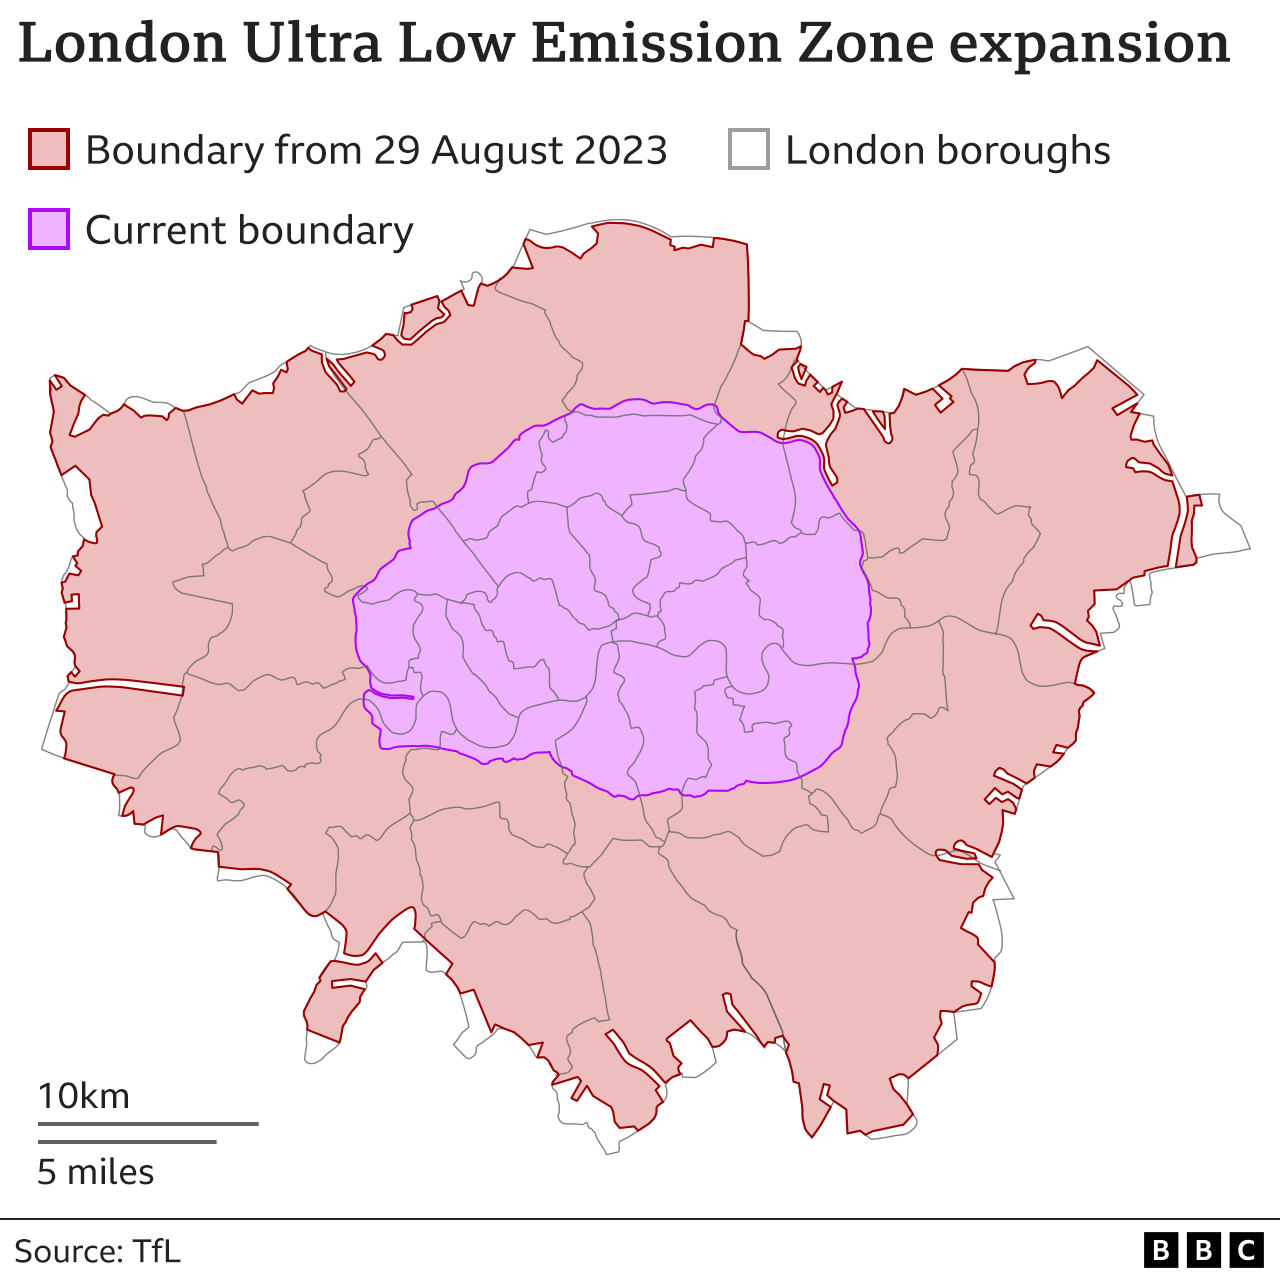 Map showing the existing Ultra Low Emission Zone in London and the boundary that will come into force at the end of August 2023